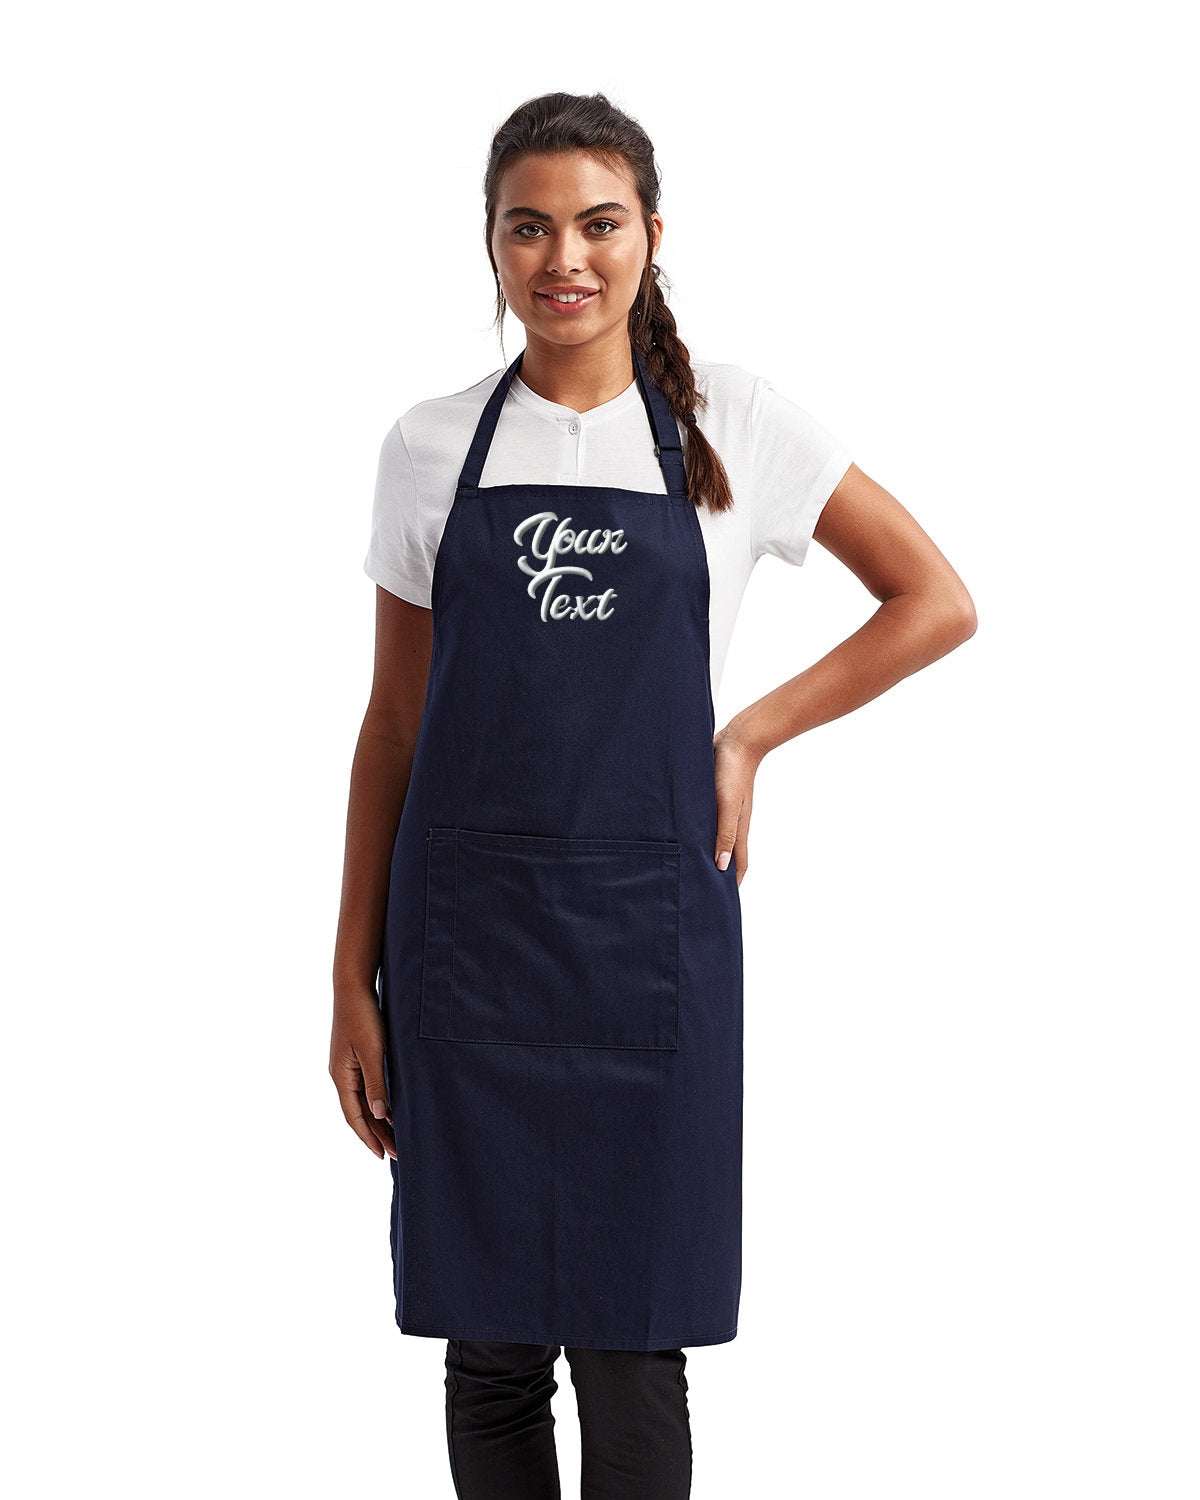 Restaurant Aprons with Your Company Name Embroidered - 3 Pack black